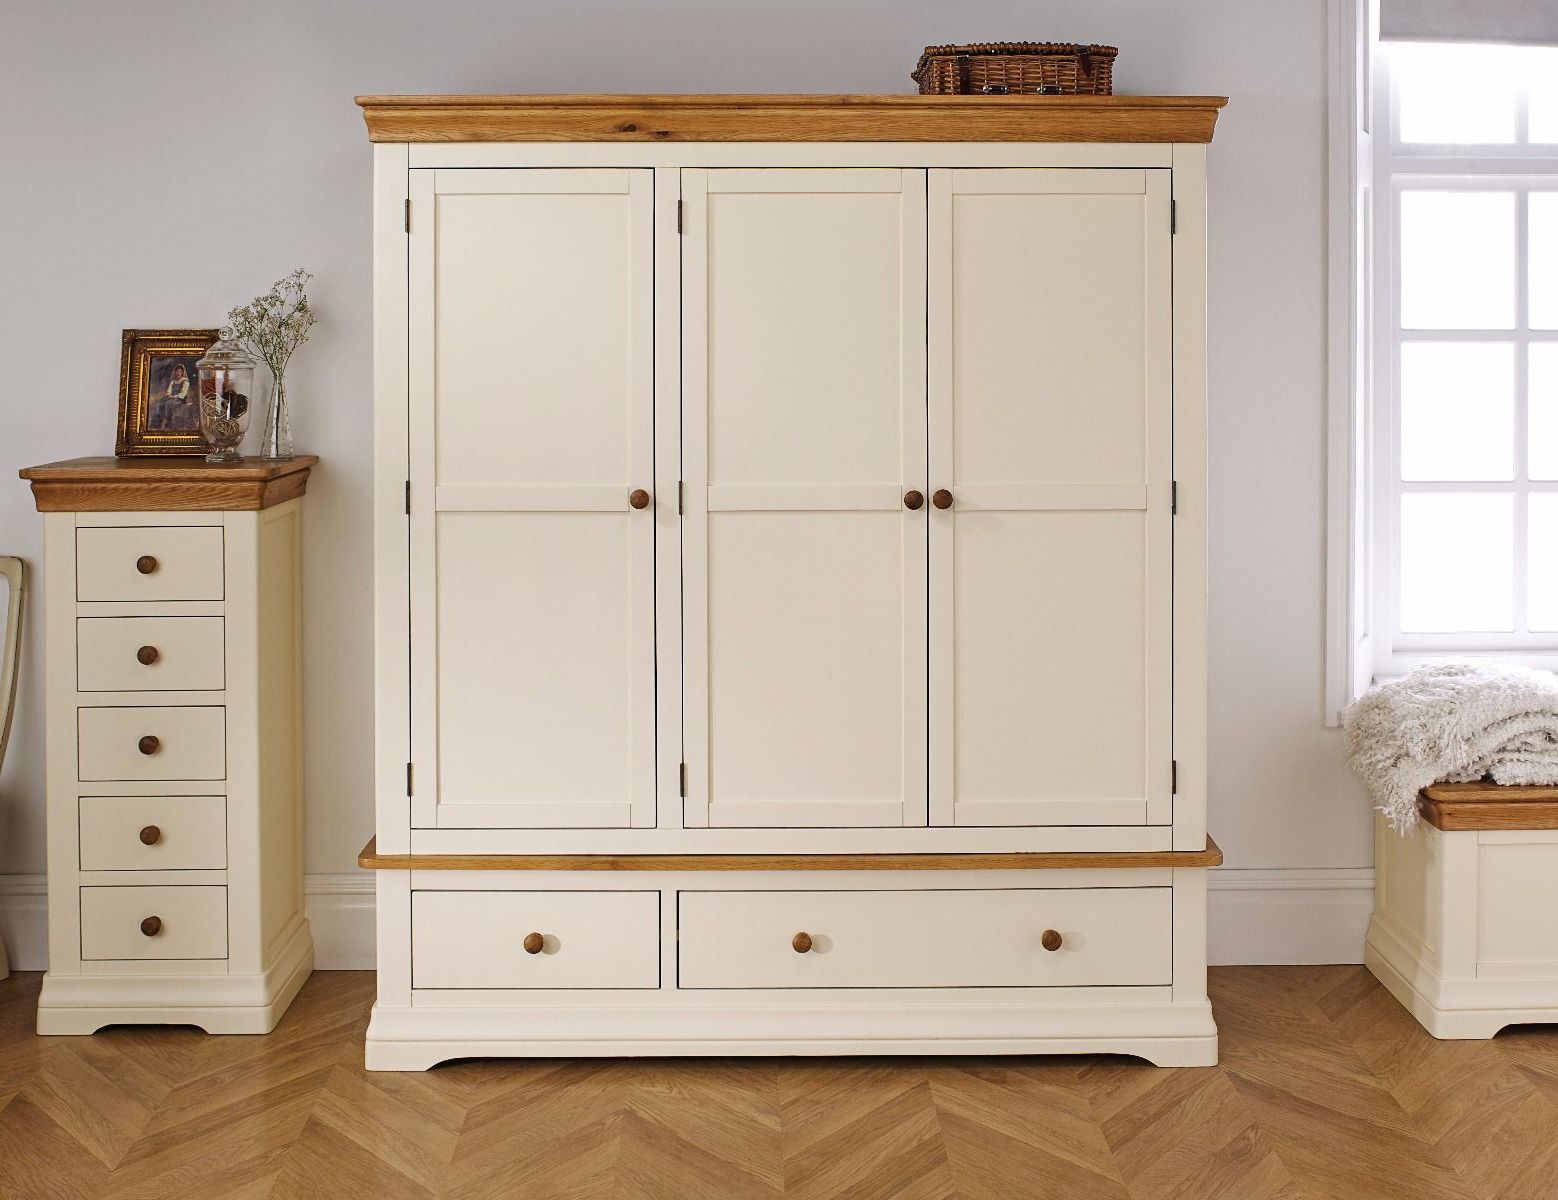 Farmhouse Cream Painted Triple Oak Wardrobe – Free Delivery | Top Furniture With Cream Triple Wardrobes (View 2 of 20)